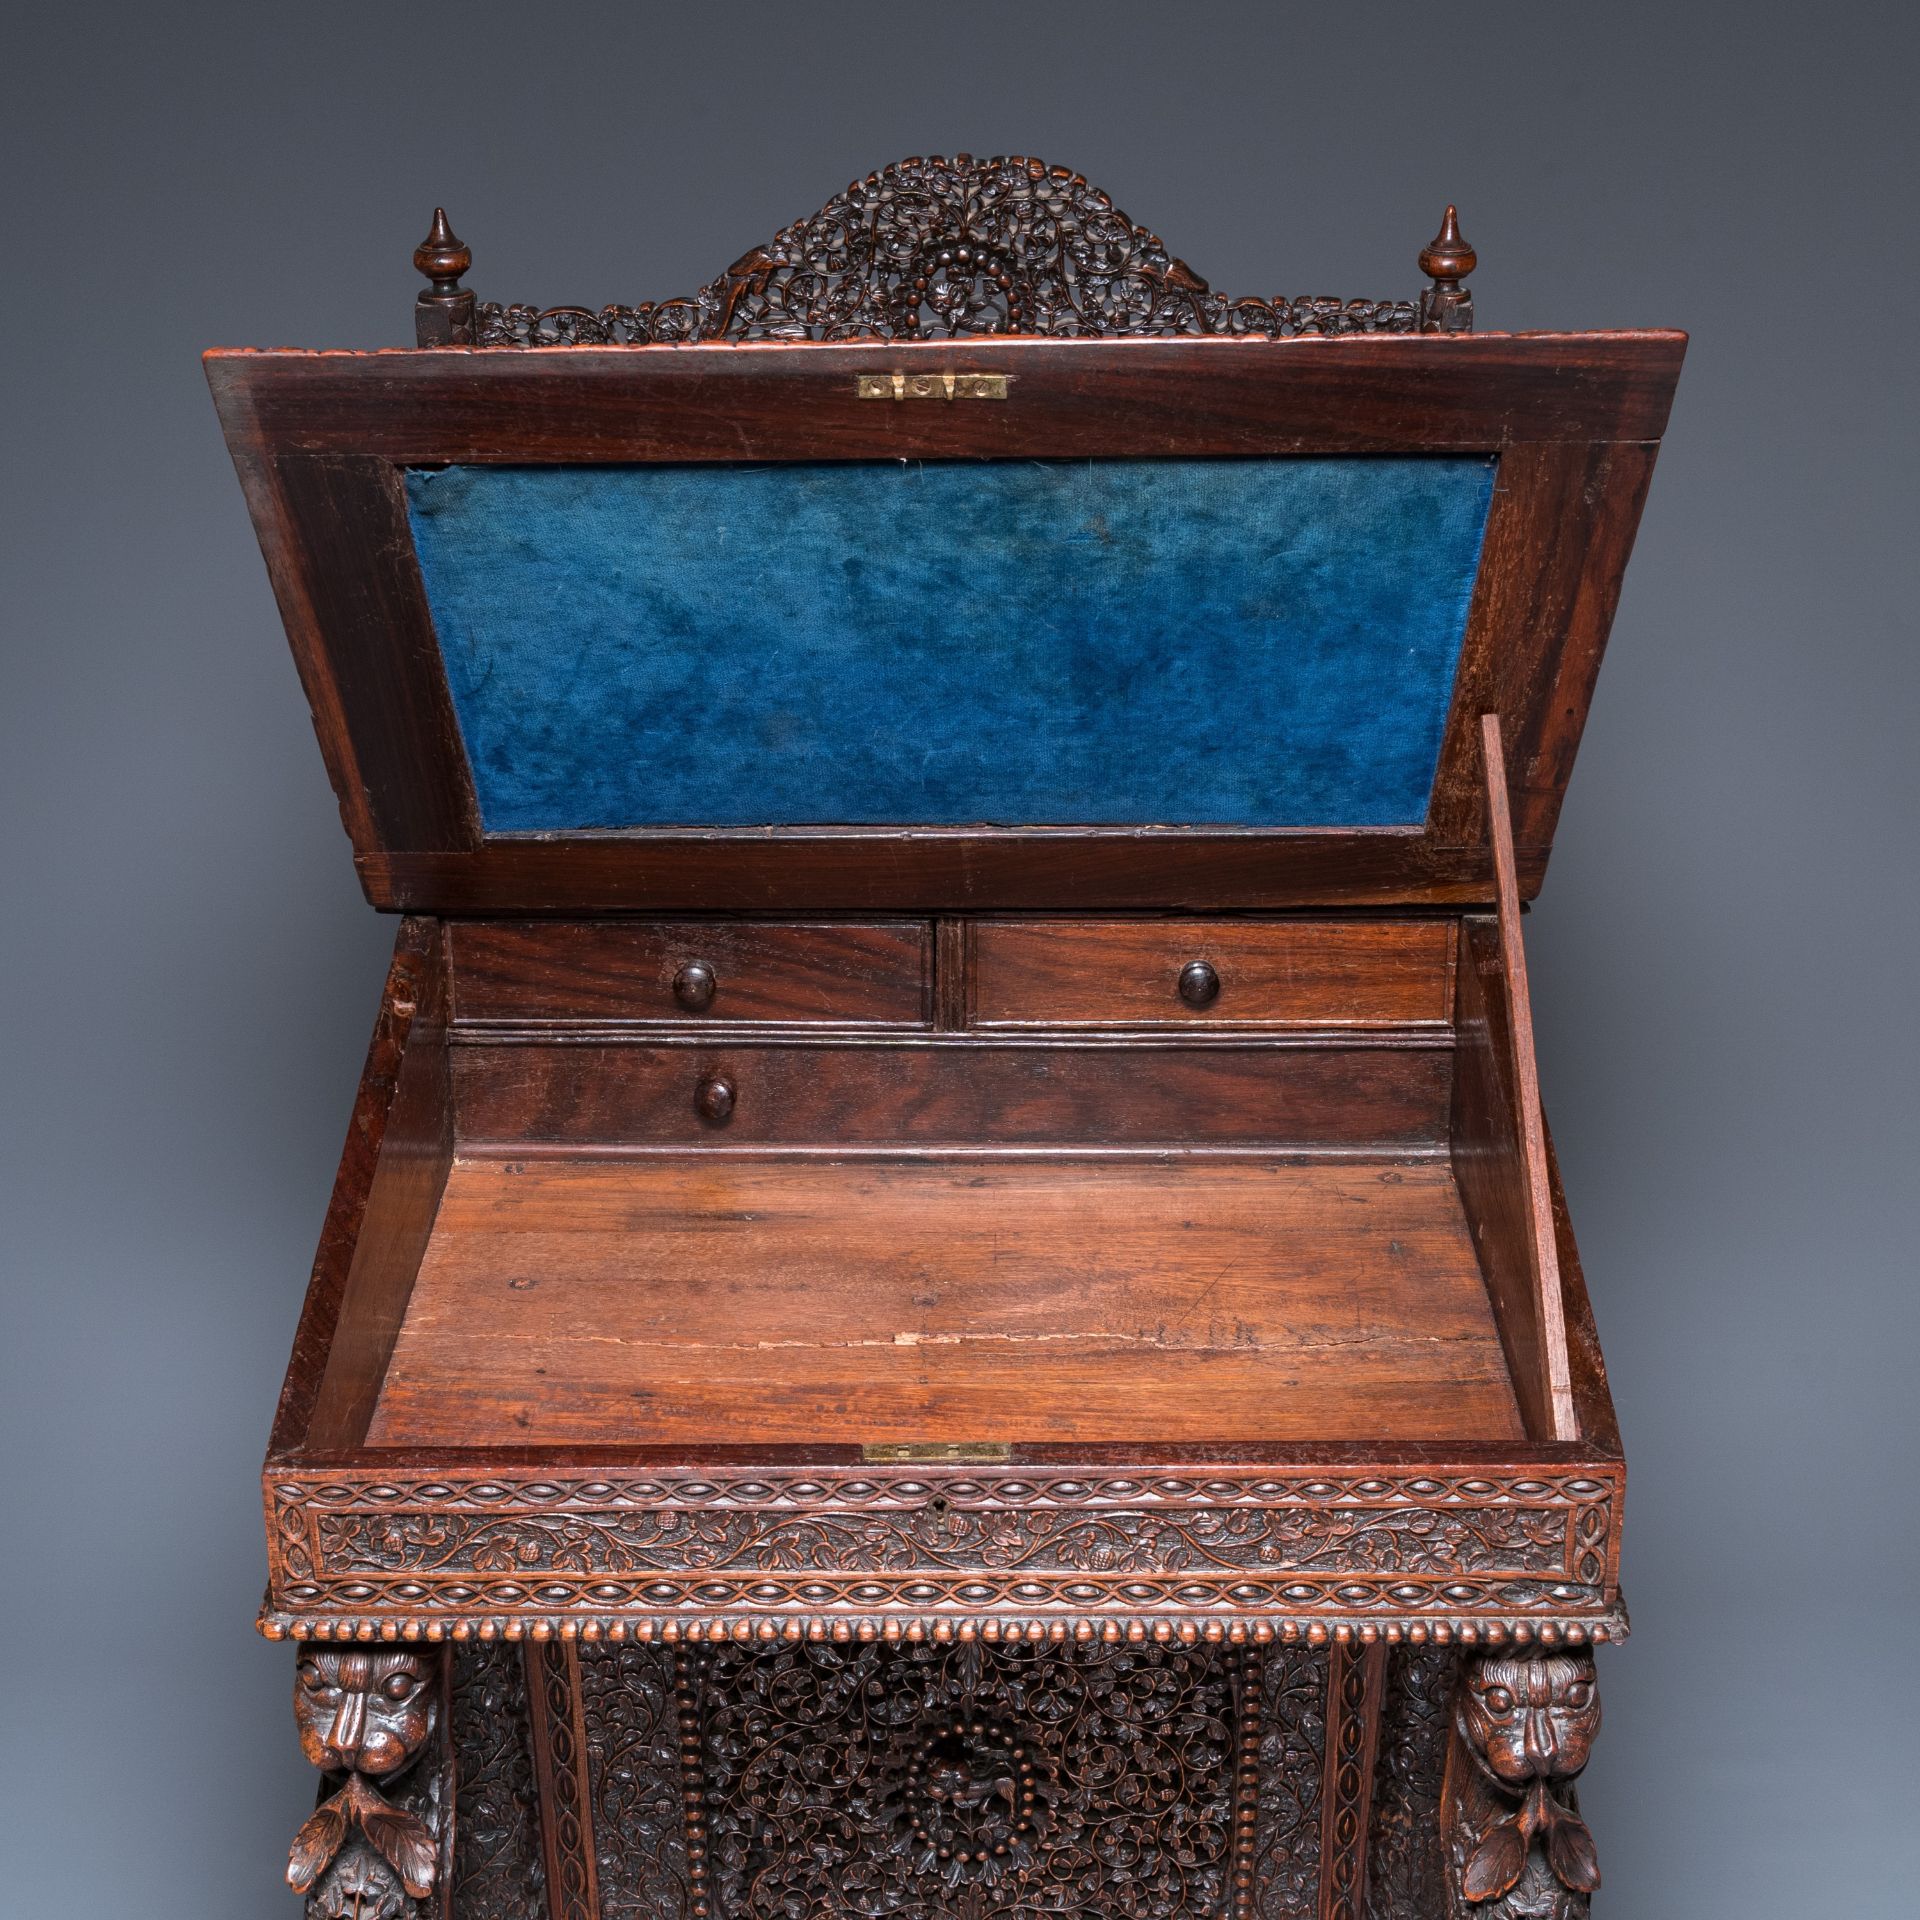 A colonial Anglo-Indian reticulated wooden desk with hidden compartment, 19th C. - Image 22 of 24